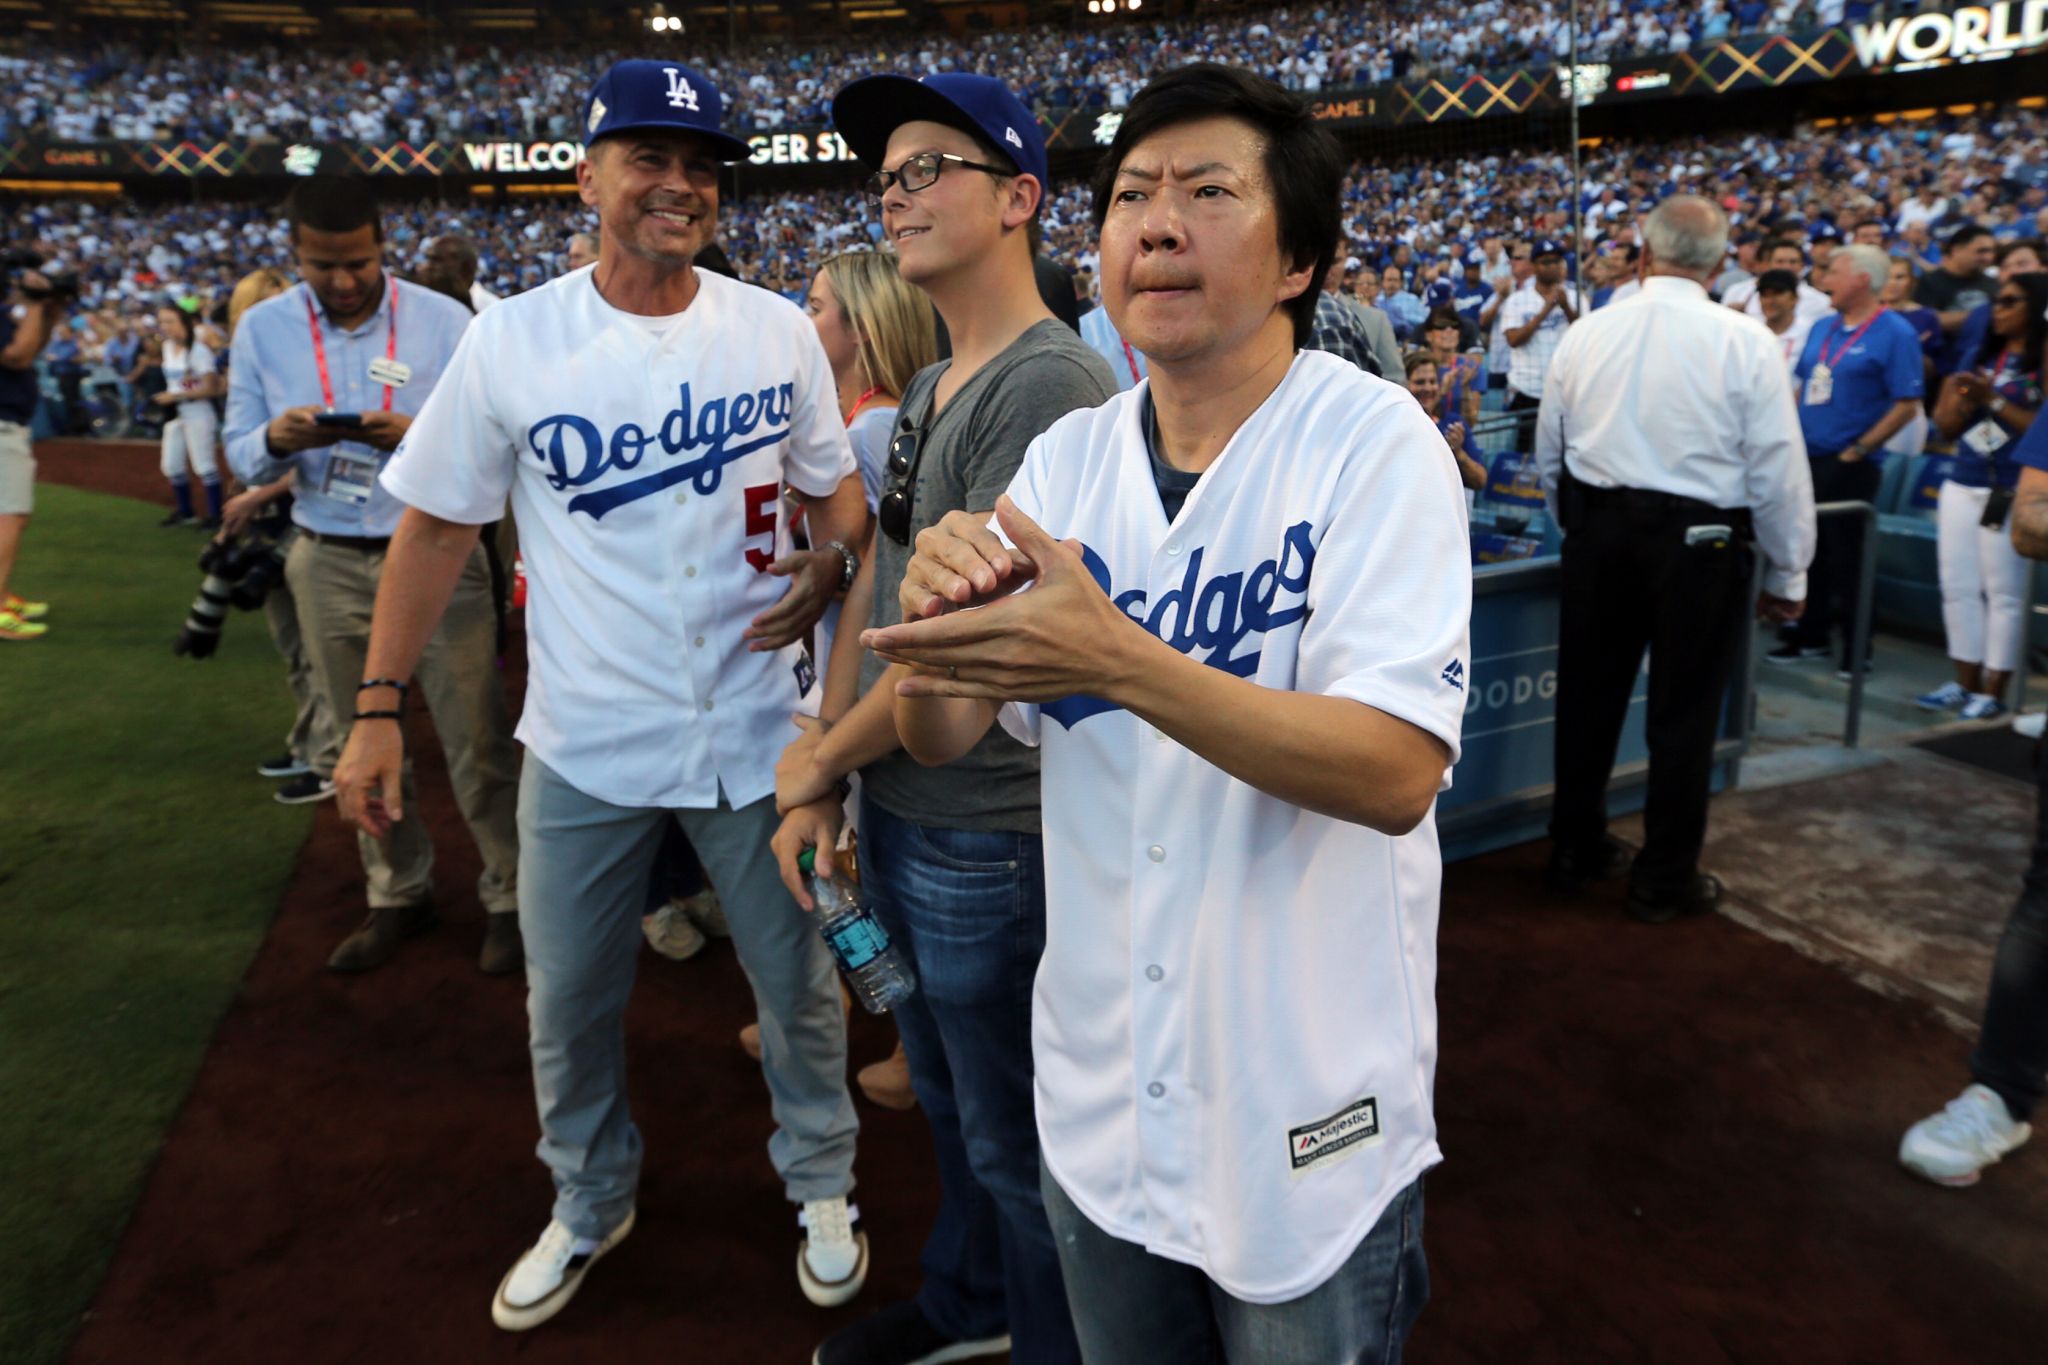 World Series 2017: Celebrities cheering on the Dodgers and the